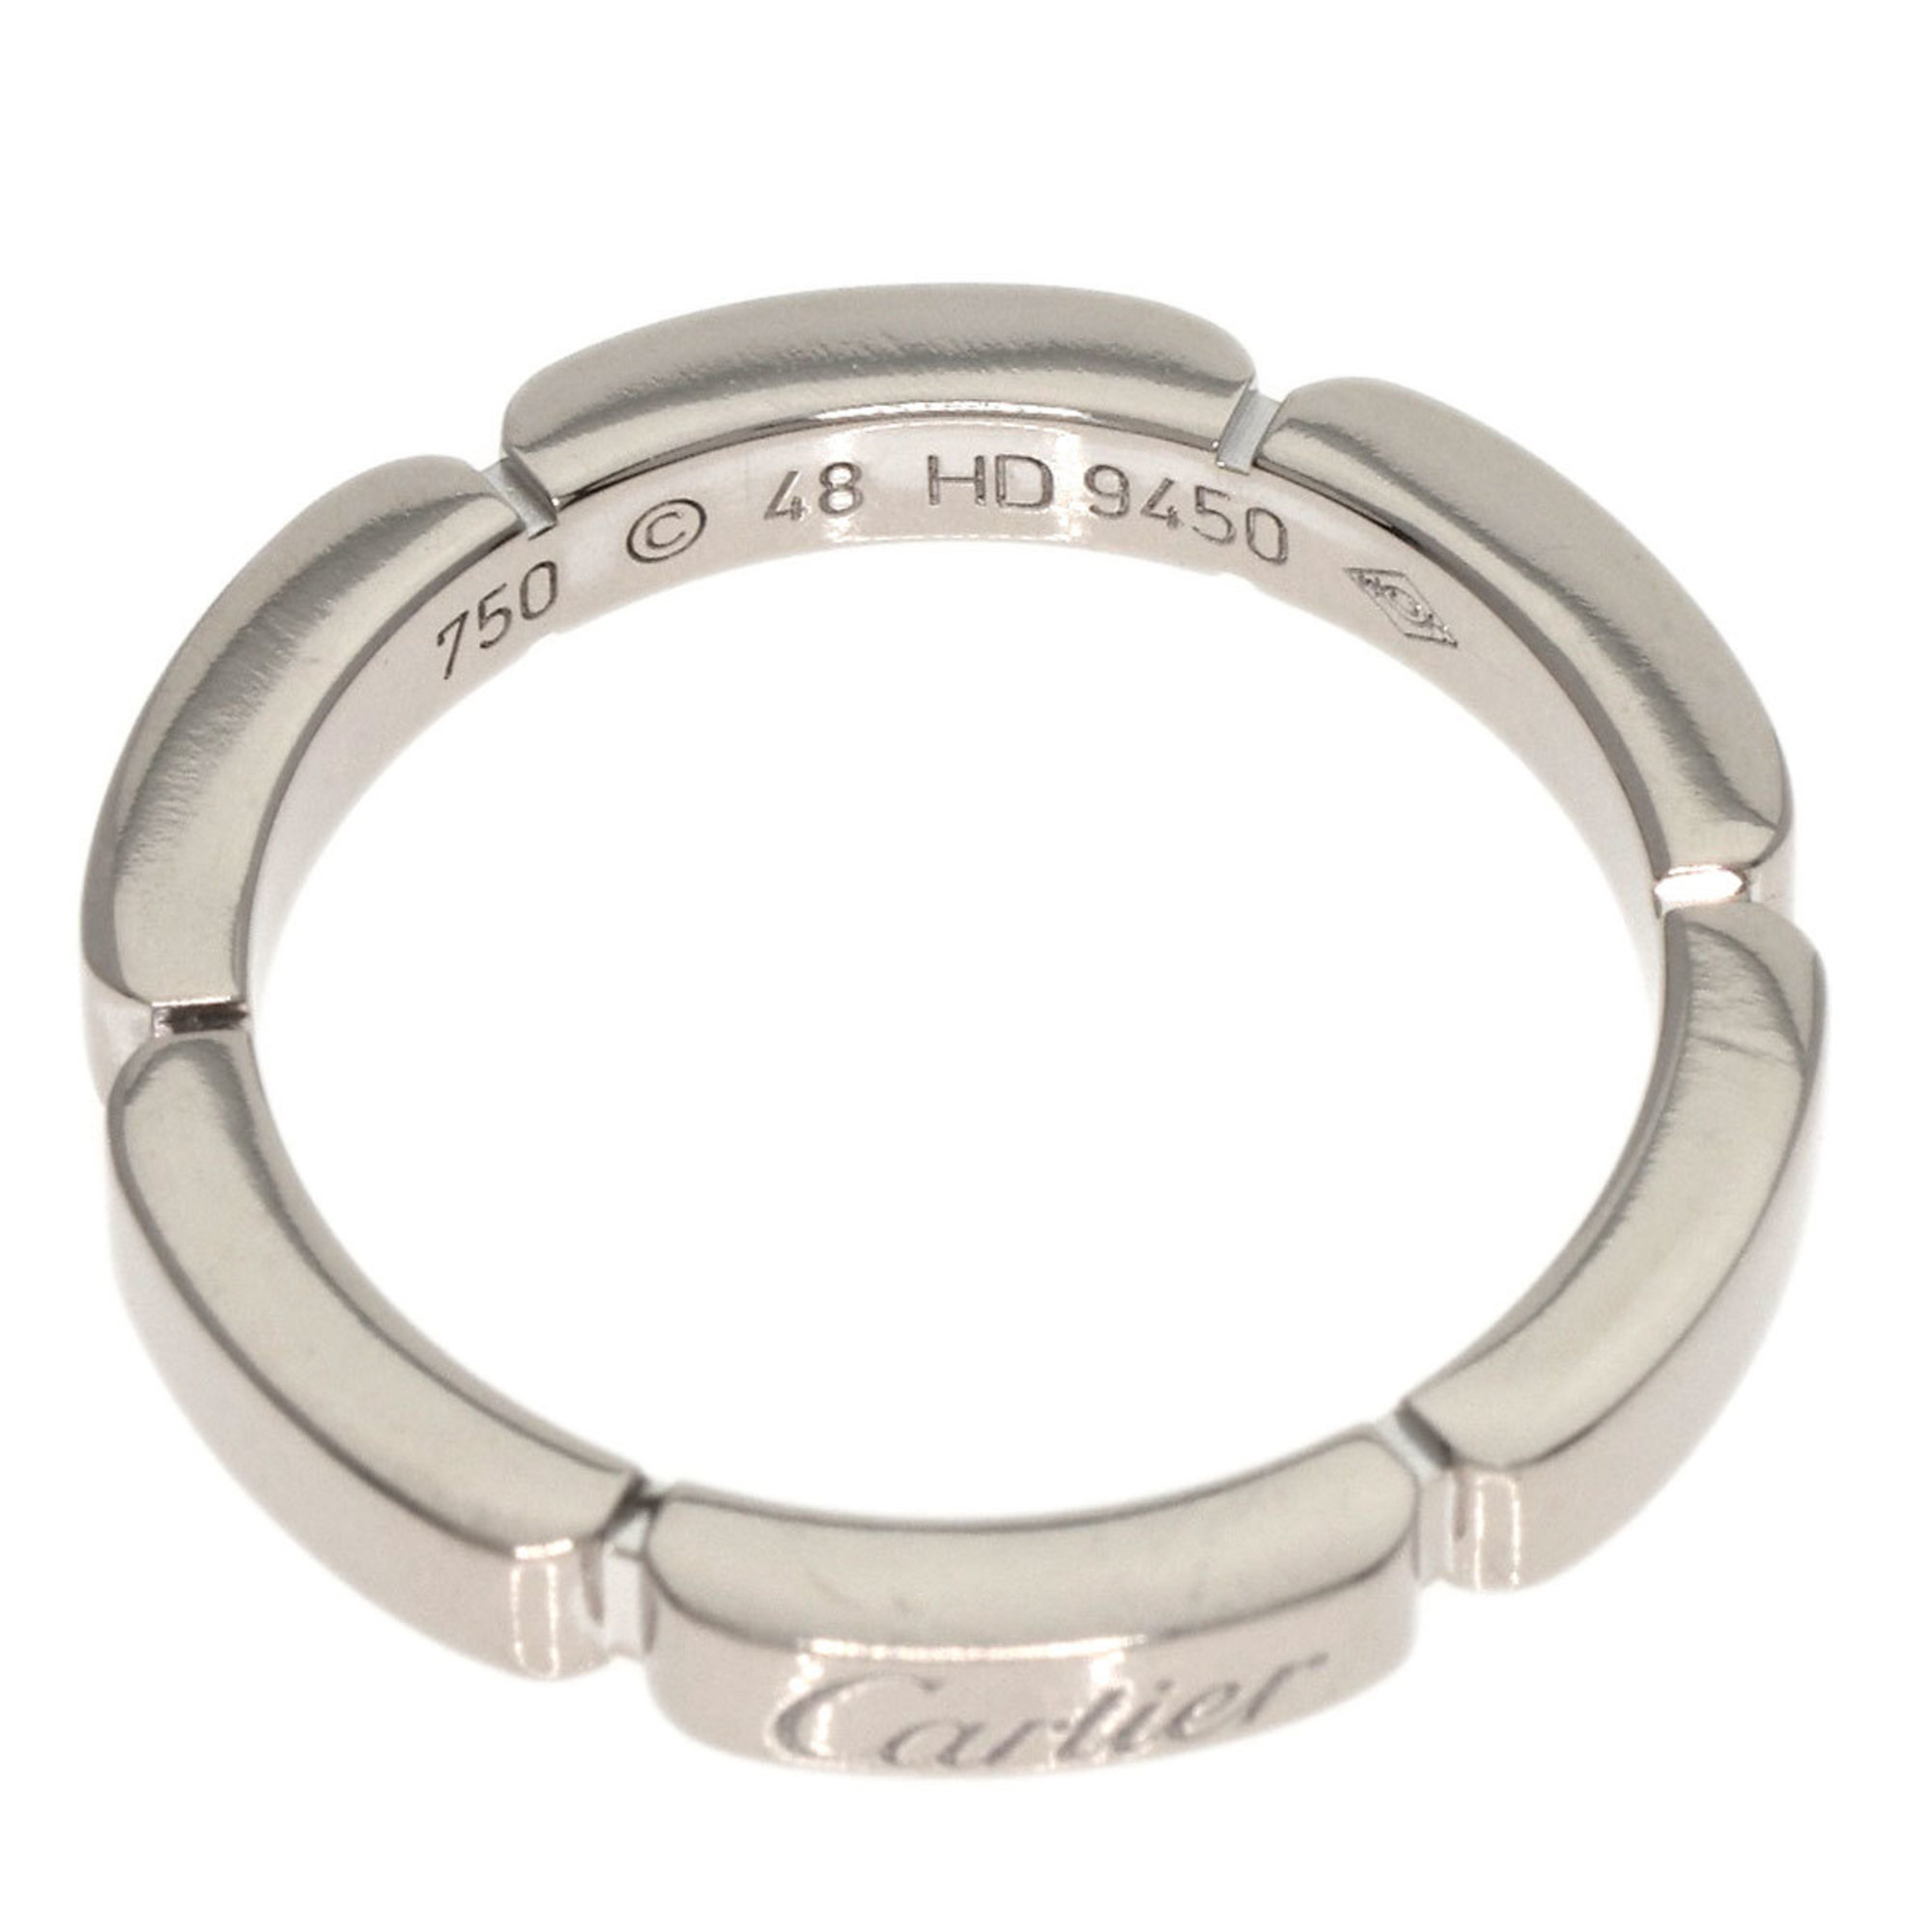 Cartier Maillon Panthere #48 Ring, 18K White Gold, Women's, CARTIER